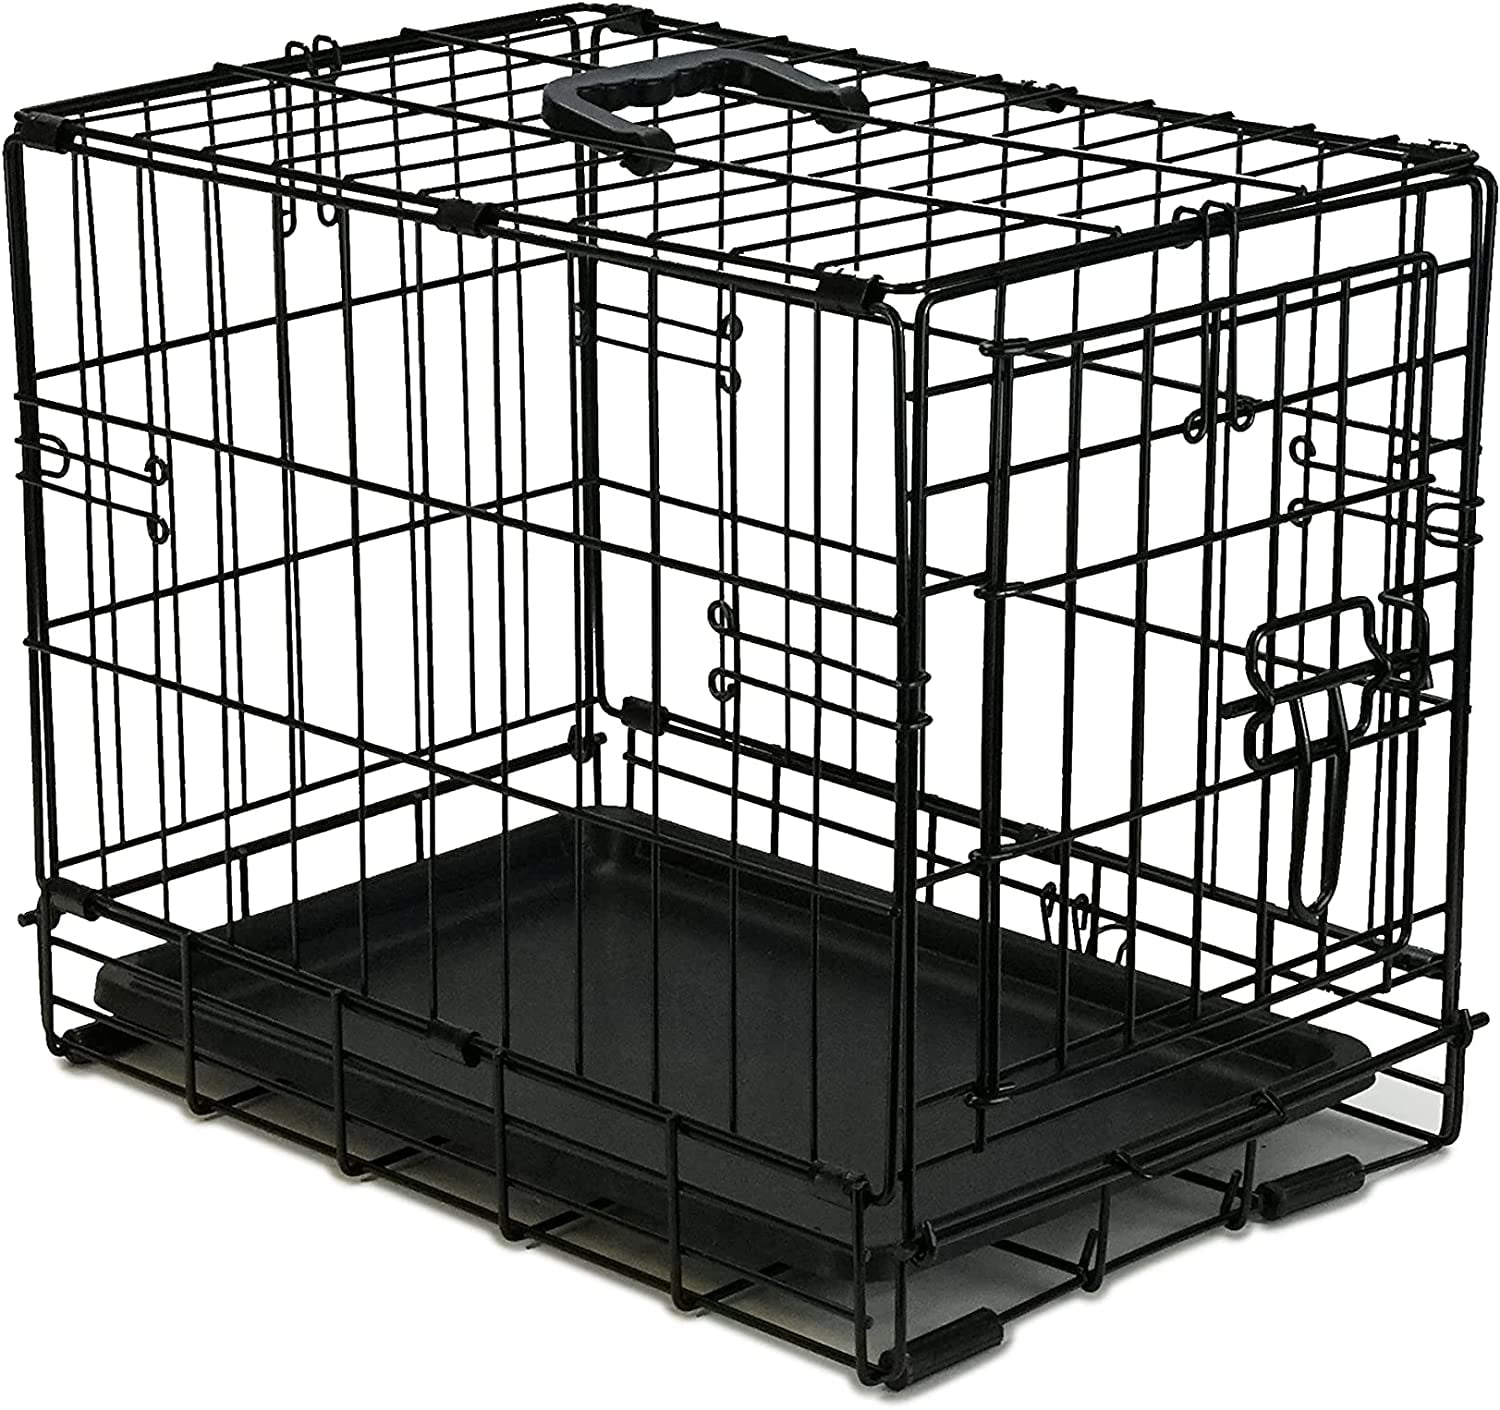 Size PETSWORLD Single Door Dog Crate Heavy Duty Folding Metal Dog or Pet Crate Kennel 24 inch w/ Divider 